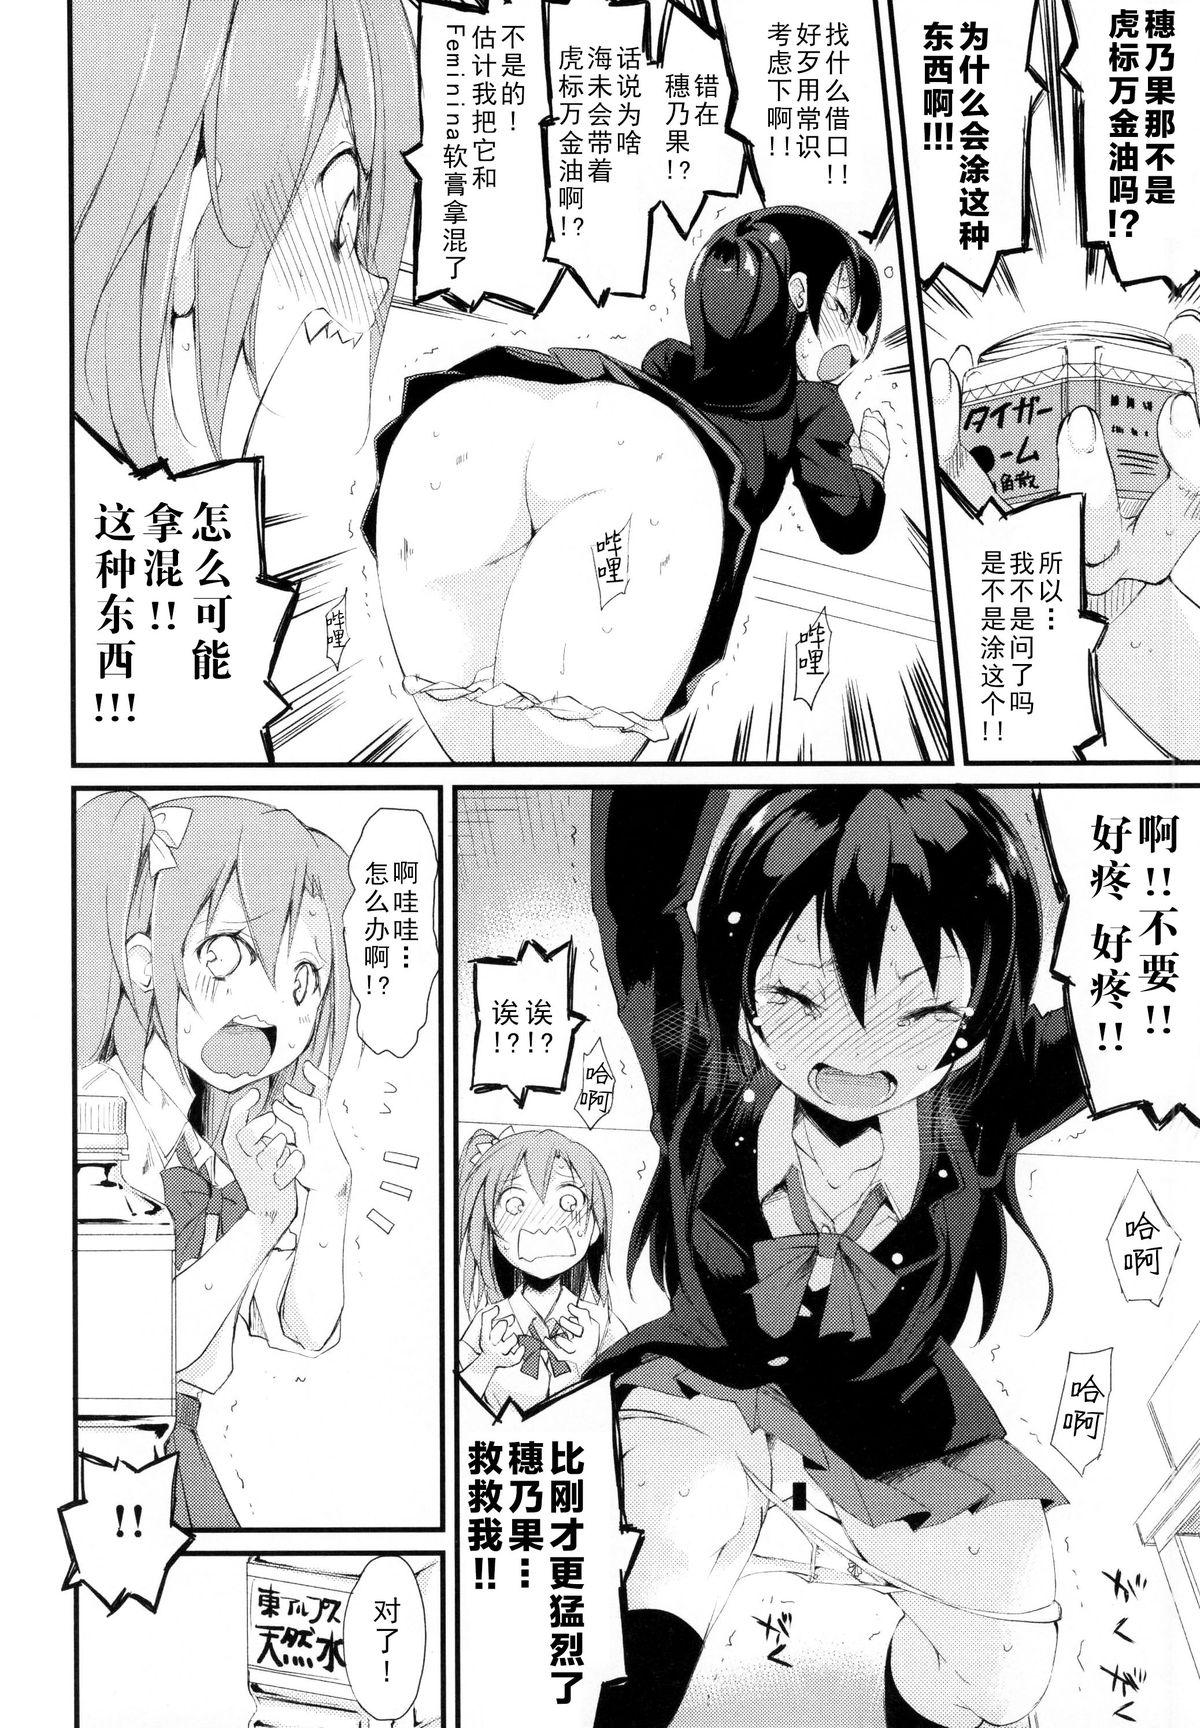 Eating Pussy SonoMan Rhapsody! - Love live Female - Page 12